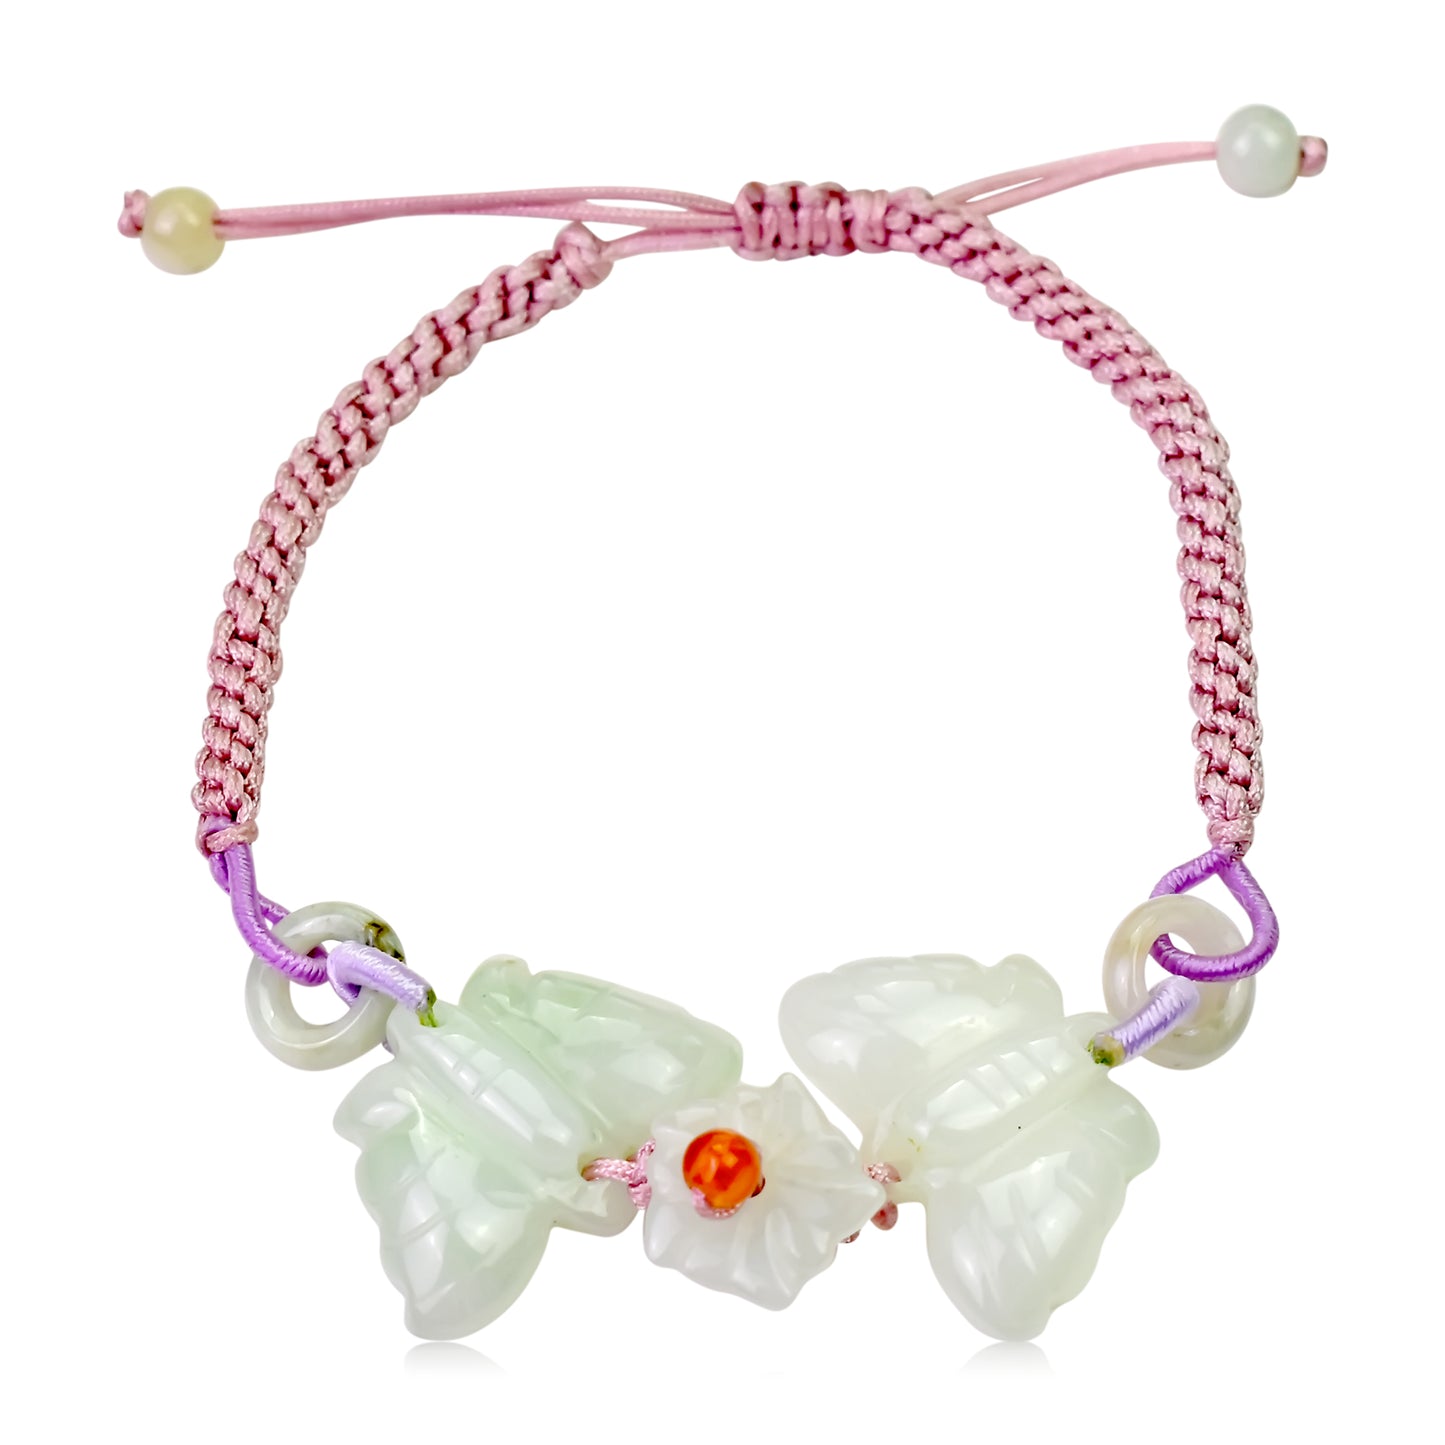 Fly Away with Style with Two Joyful Butterflies Jade Bracelet made with Pink Cord